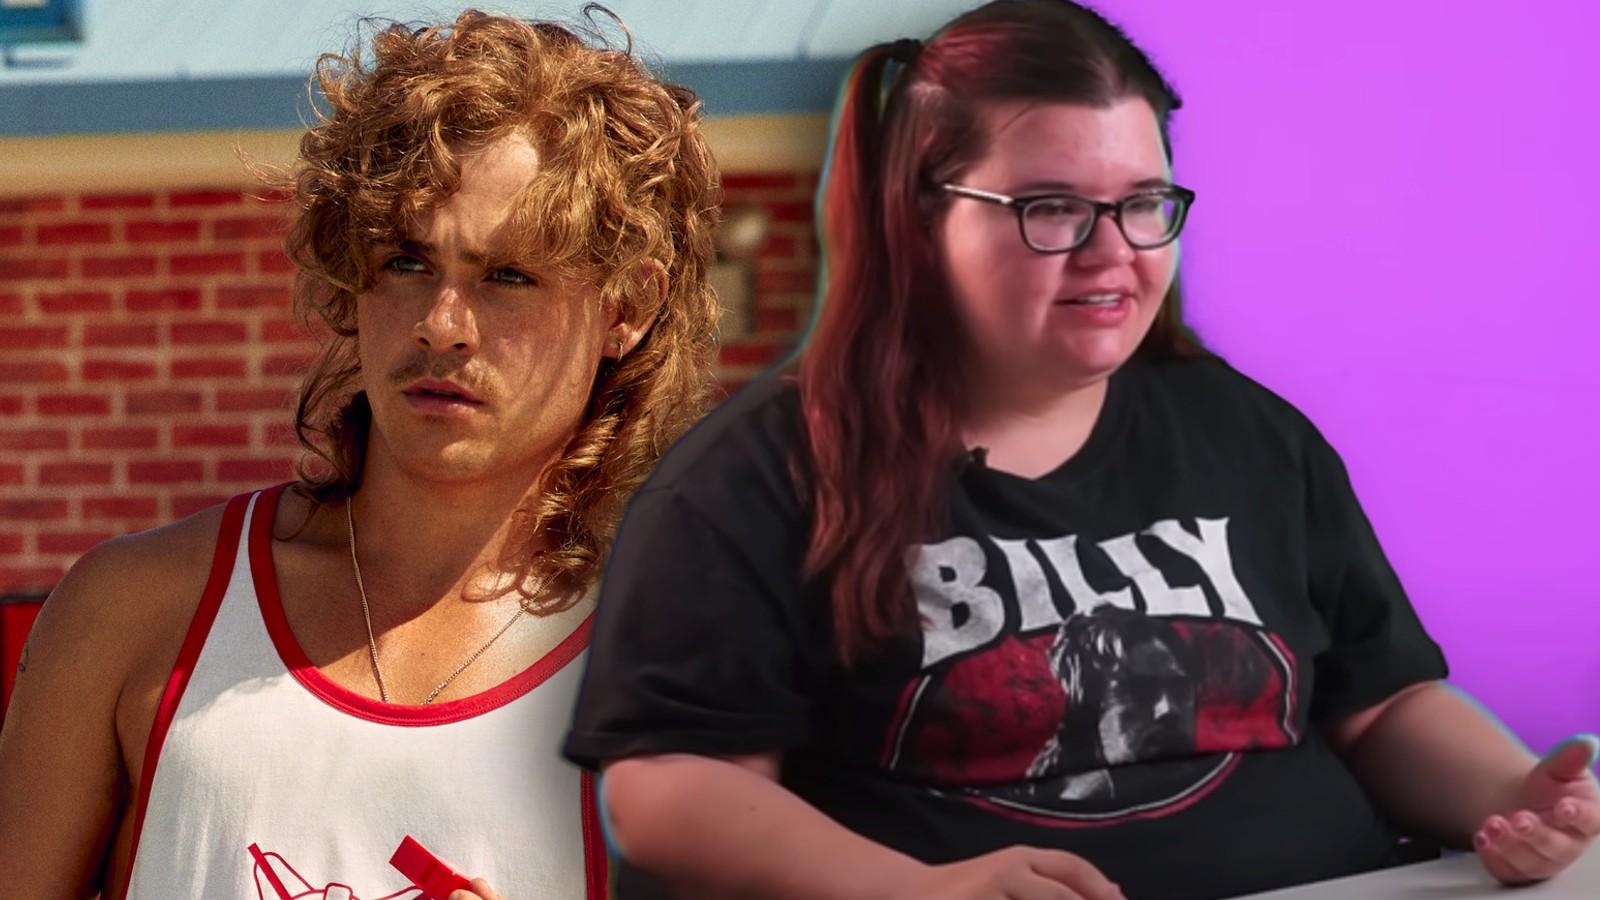 Dacre Montgomery in Stranger Things and McKala from the Scamfished video